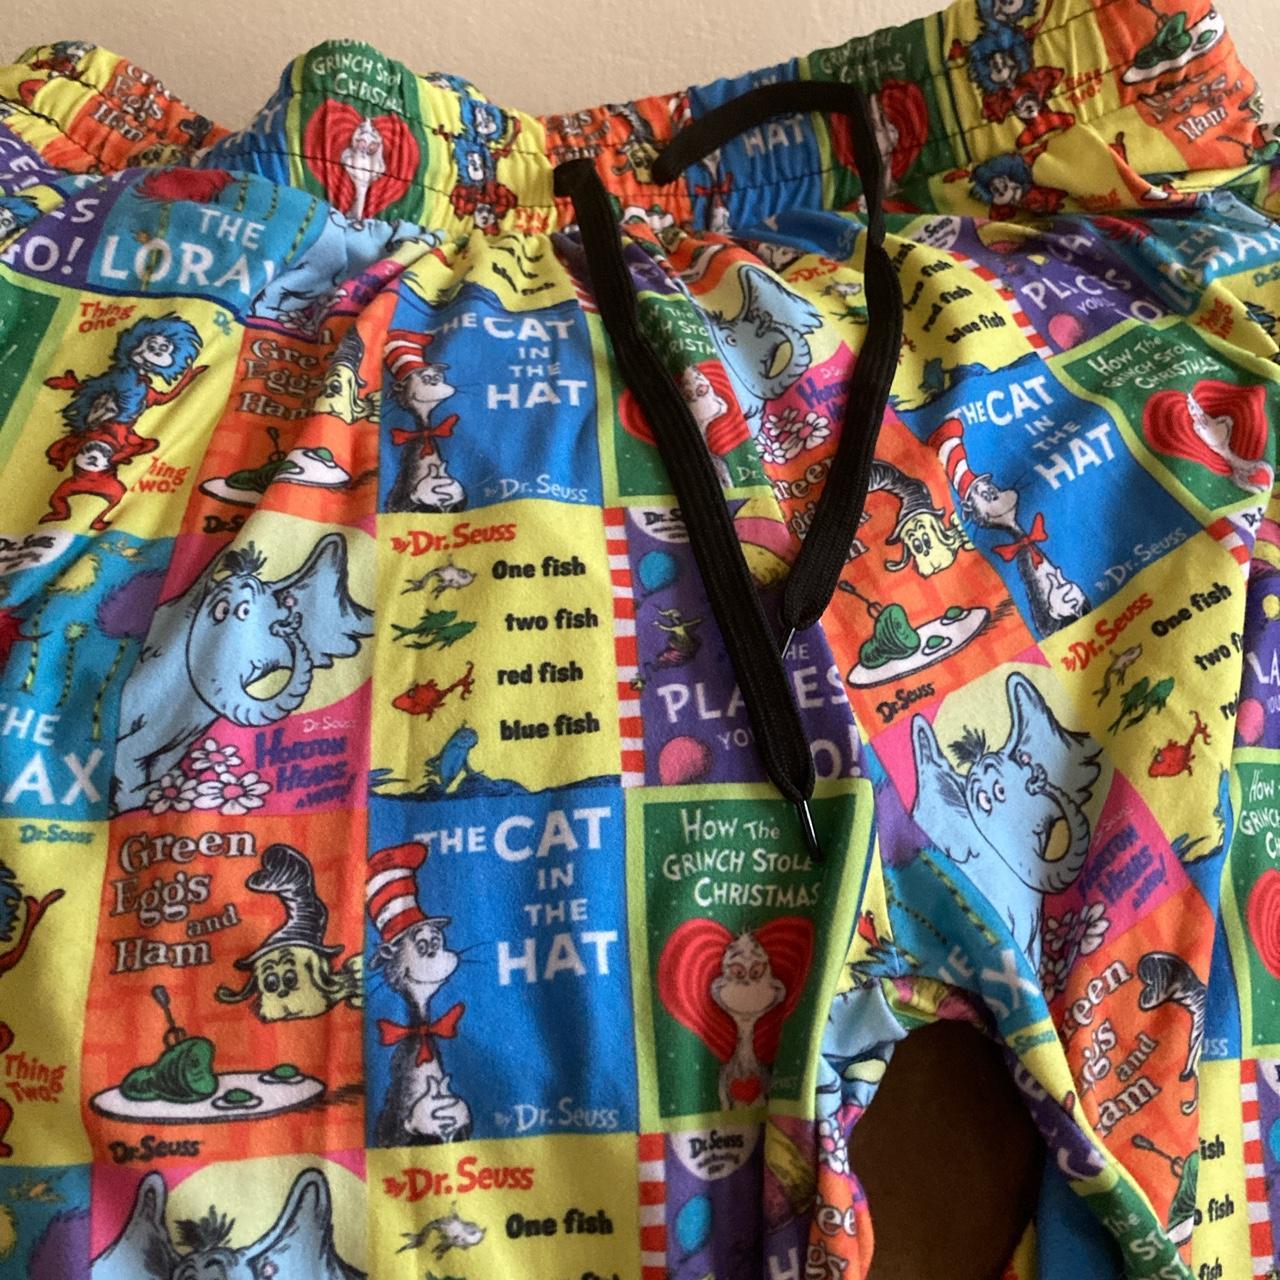 SO confused by these $40 Kmart pajama pants?? : r/Depop